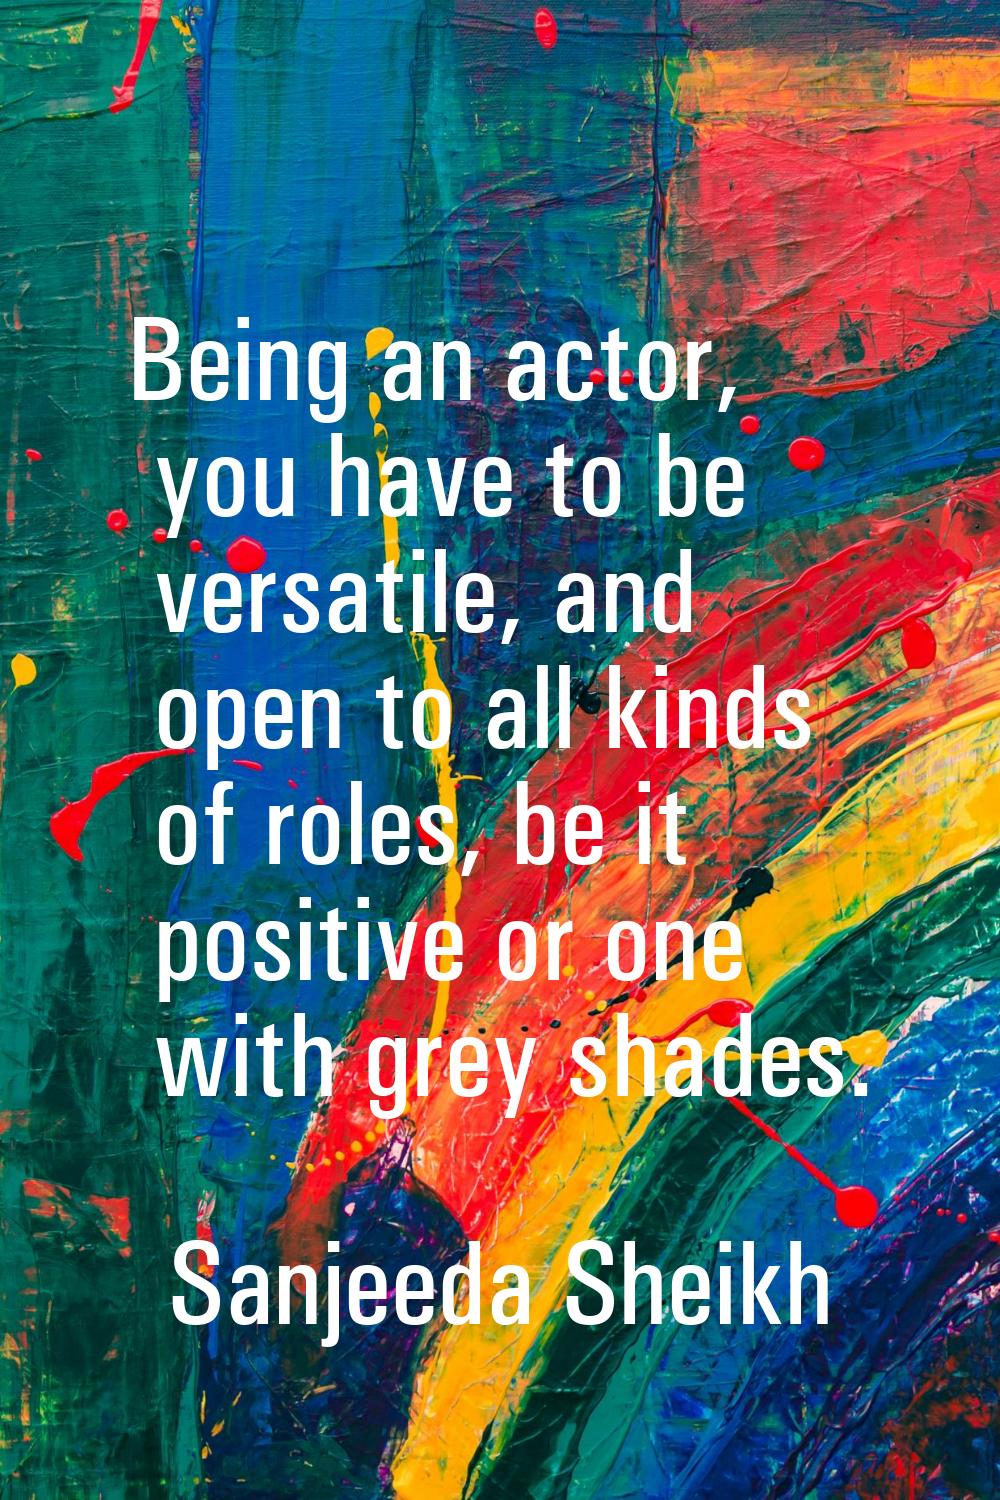 Being an actor, you have to be versatile, and open to all kinds of roles, be it positive or one wit